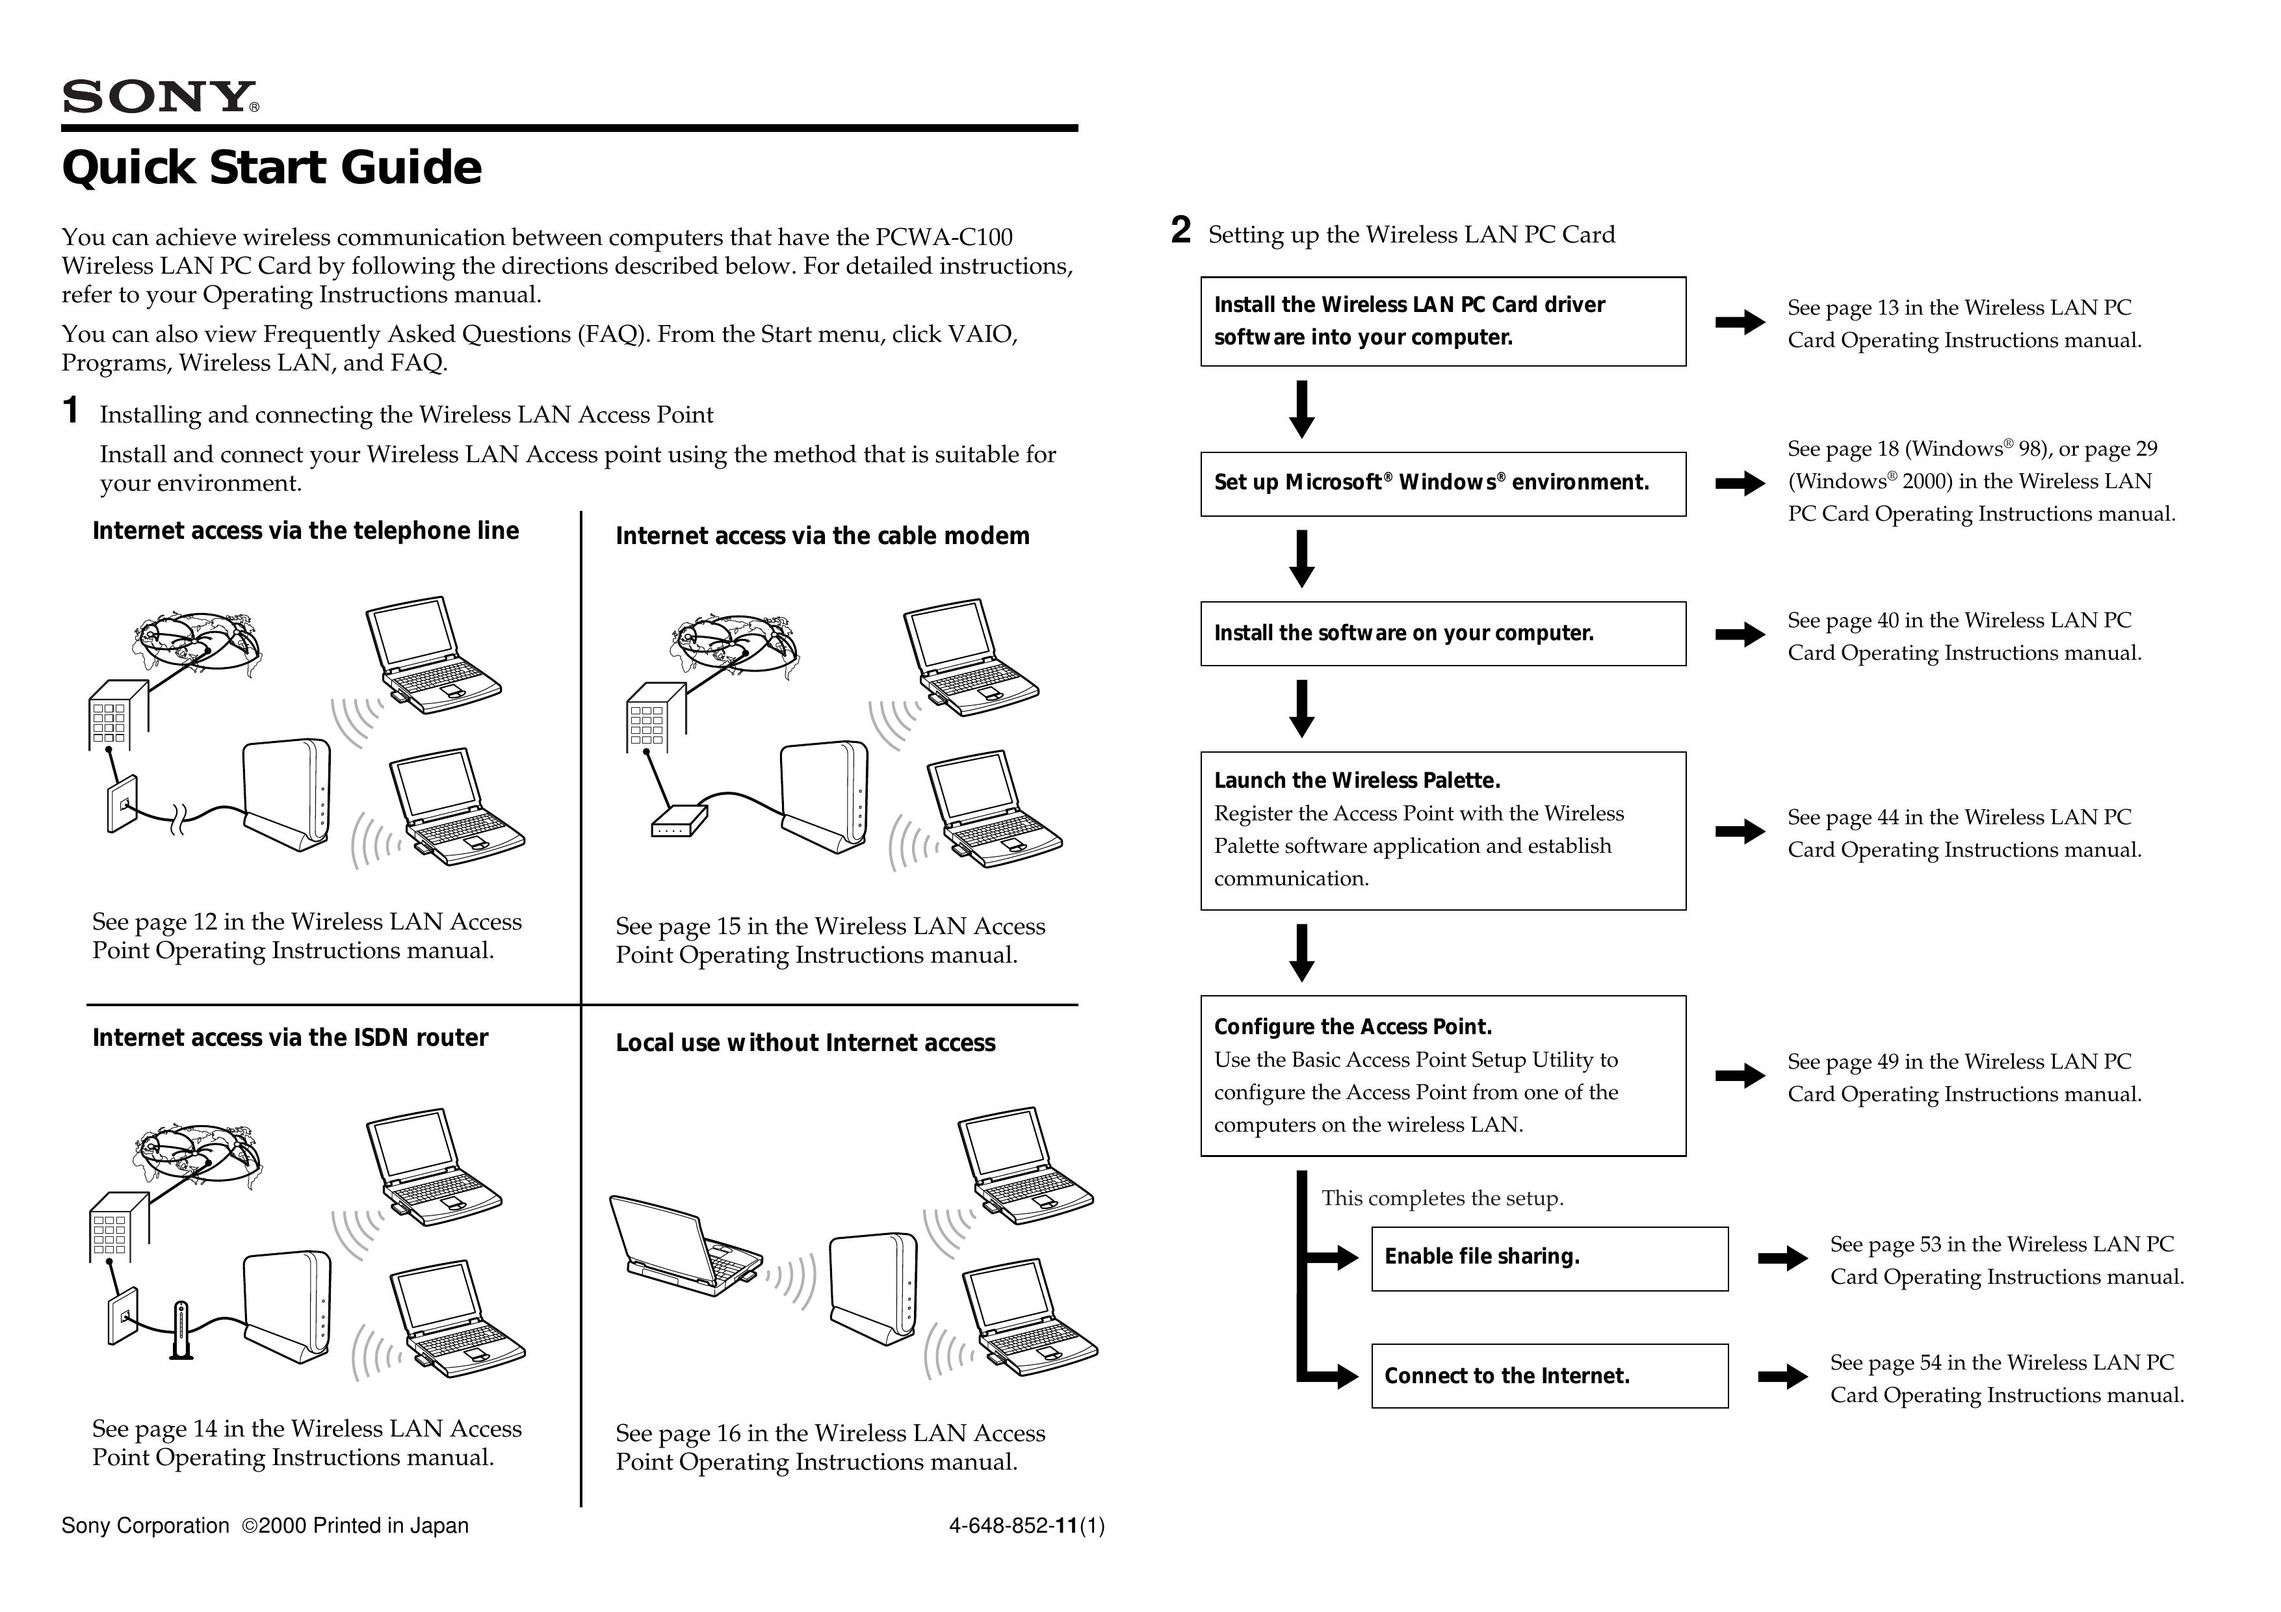 Sony PCWA-C100 Network Router User Manual